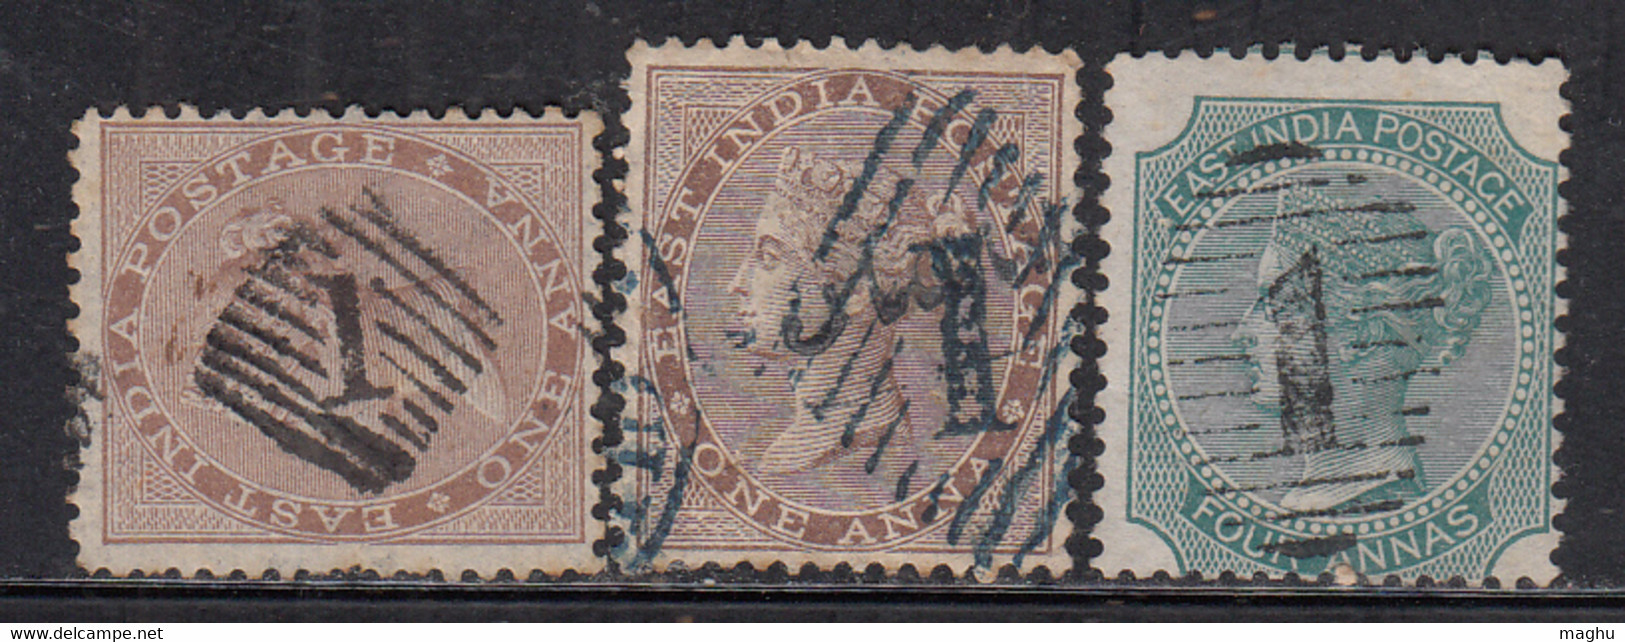 3 Diff., Varities Of Bombay, Local, Cooper / Renouf Type 4 & 15 , British East India Used, Early Indian Cancellations - 1854 Britse Indische Compagnie